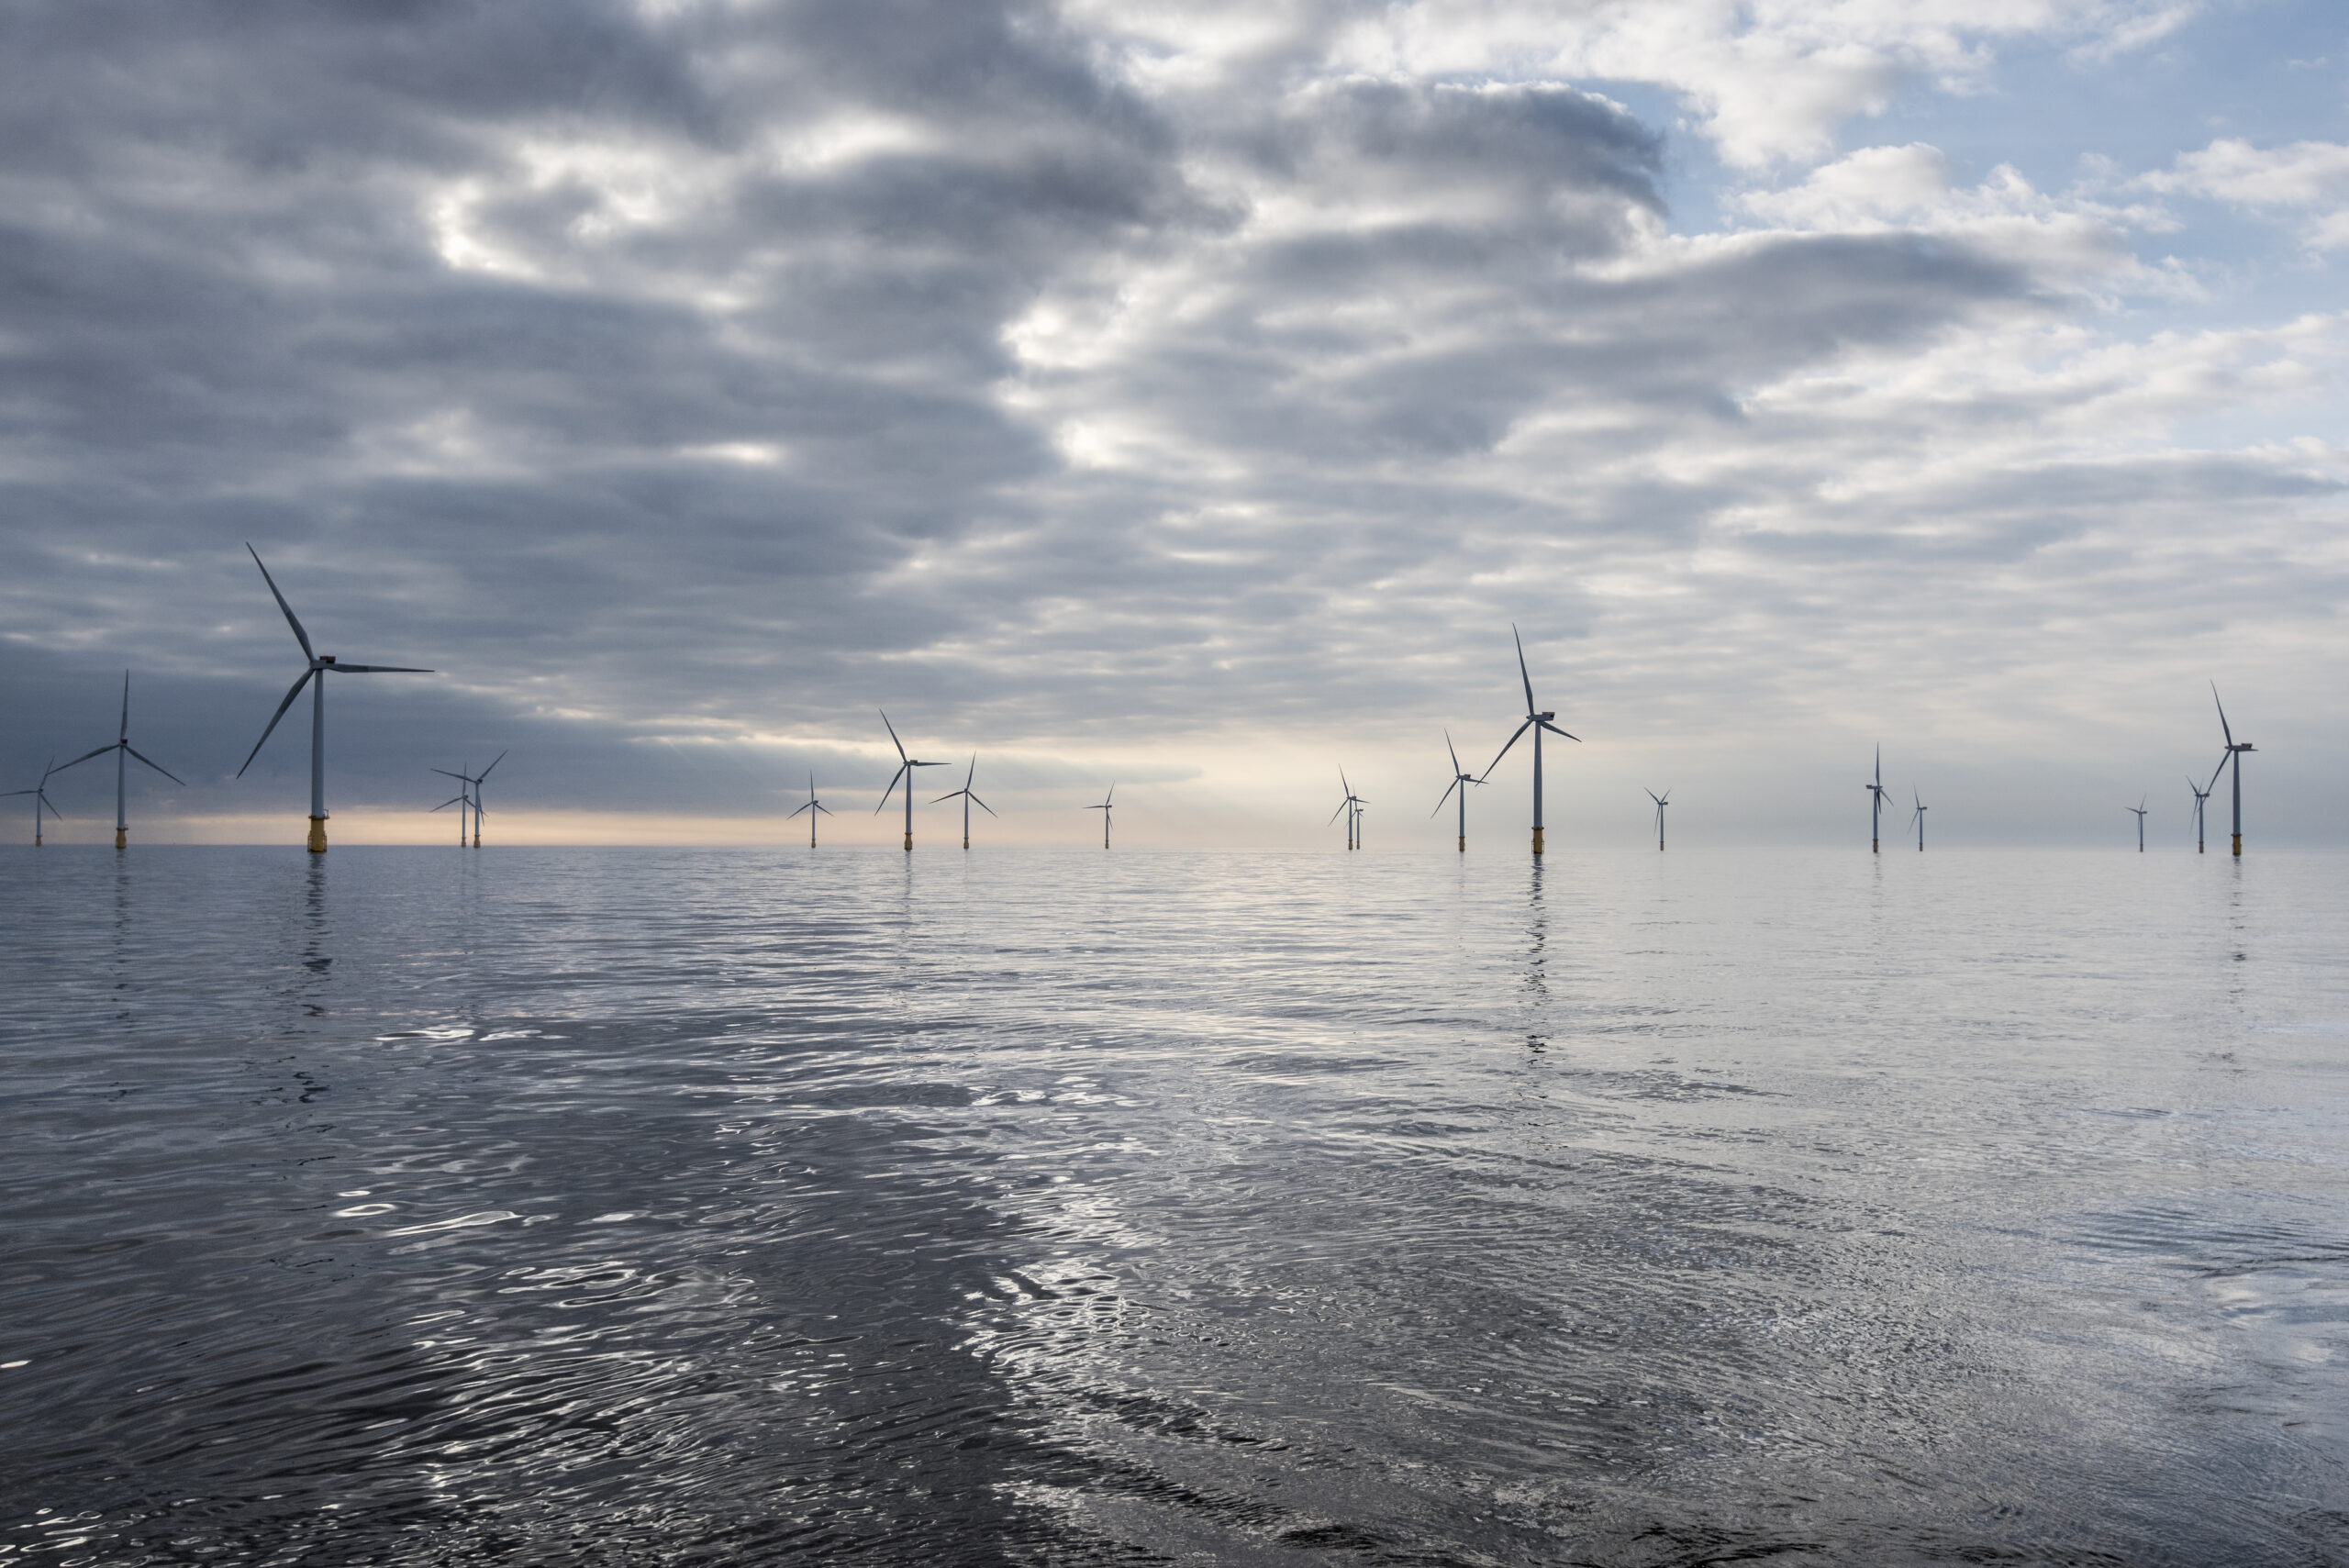 Four new partners have joined the Offshore Renewable Energy (ORE) Catapult’s joint industry project (JIP) to develop seabed mobility guidance for the offshore renewable sector